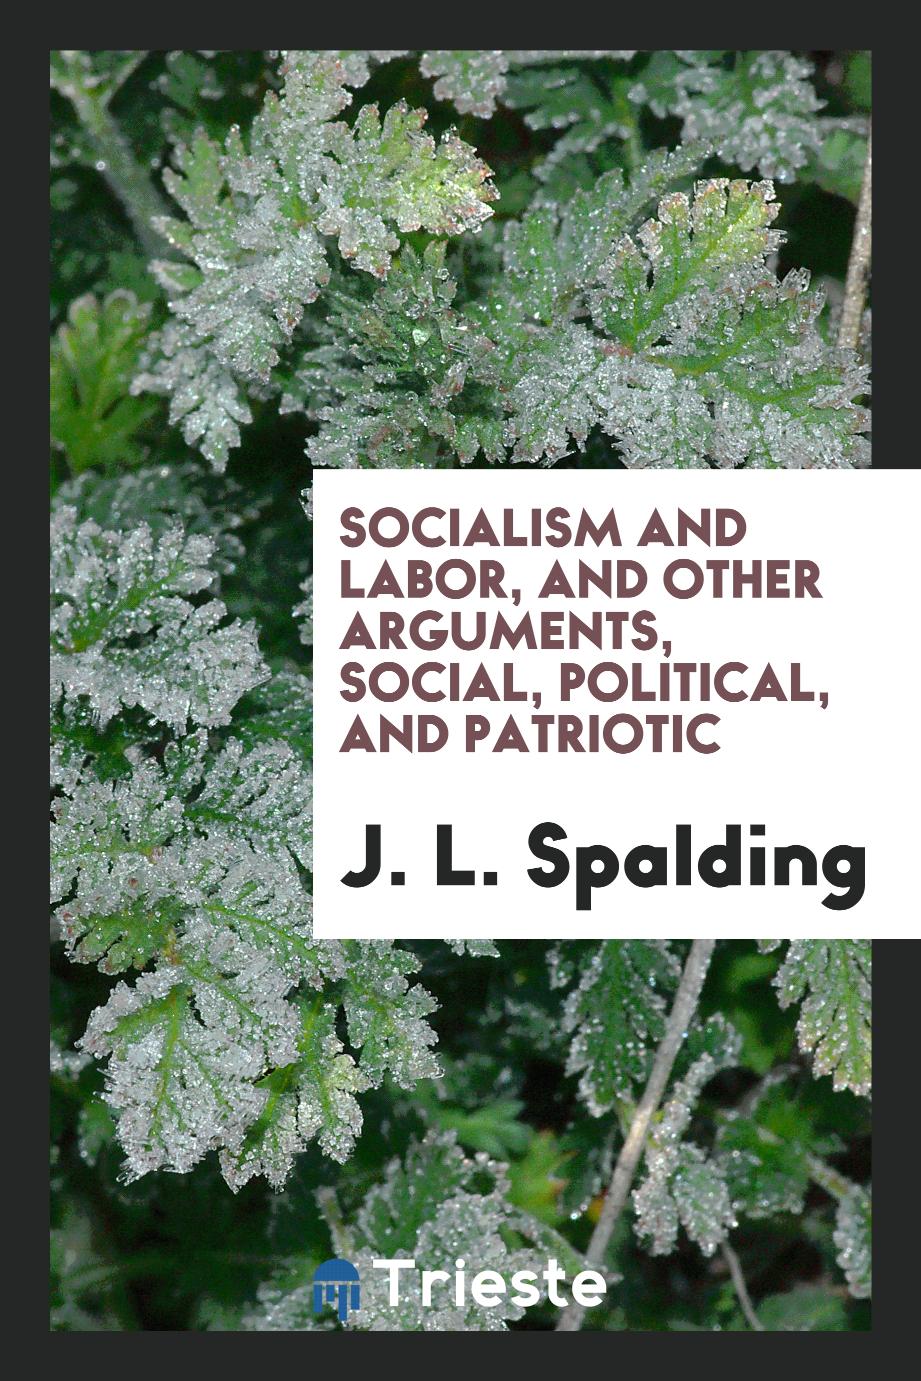 Socialism and Labor, and Other Arguments, Social, Political, and Patriotic